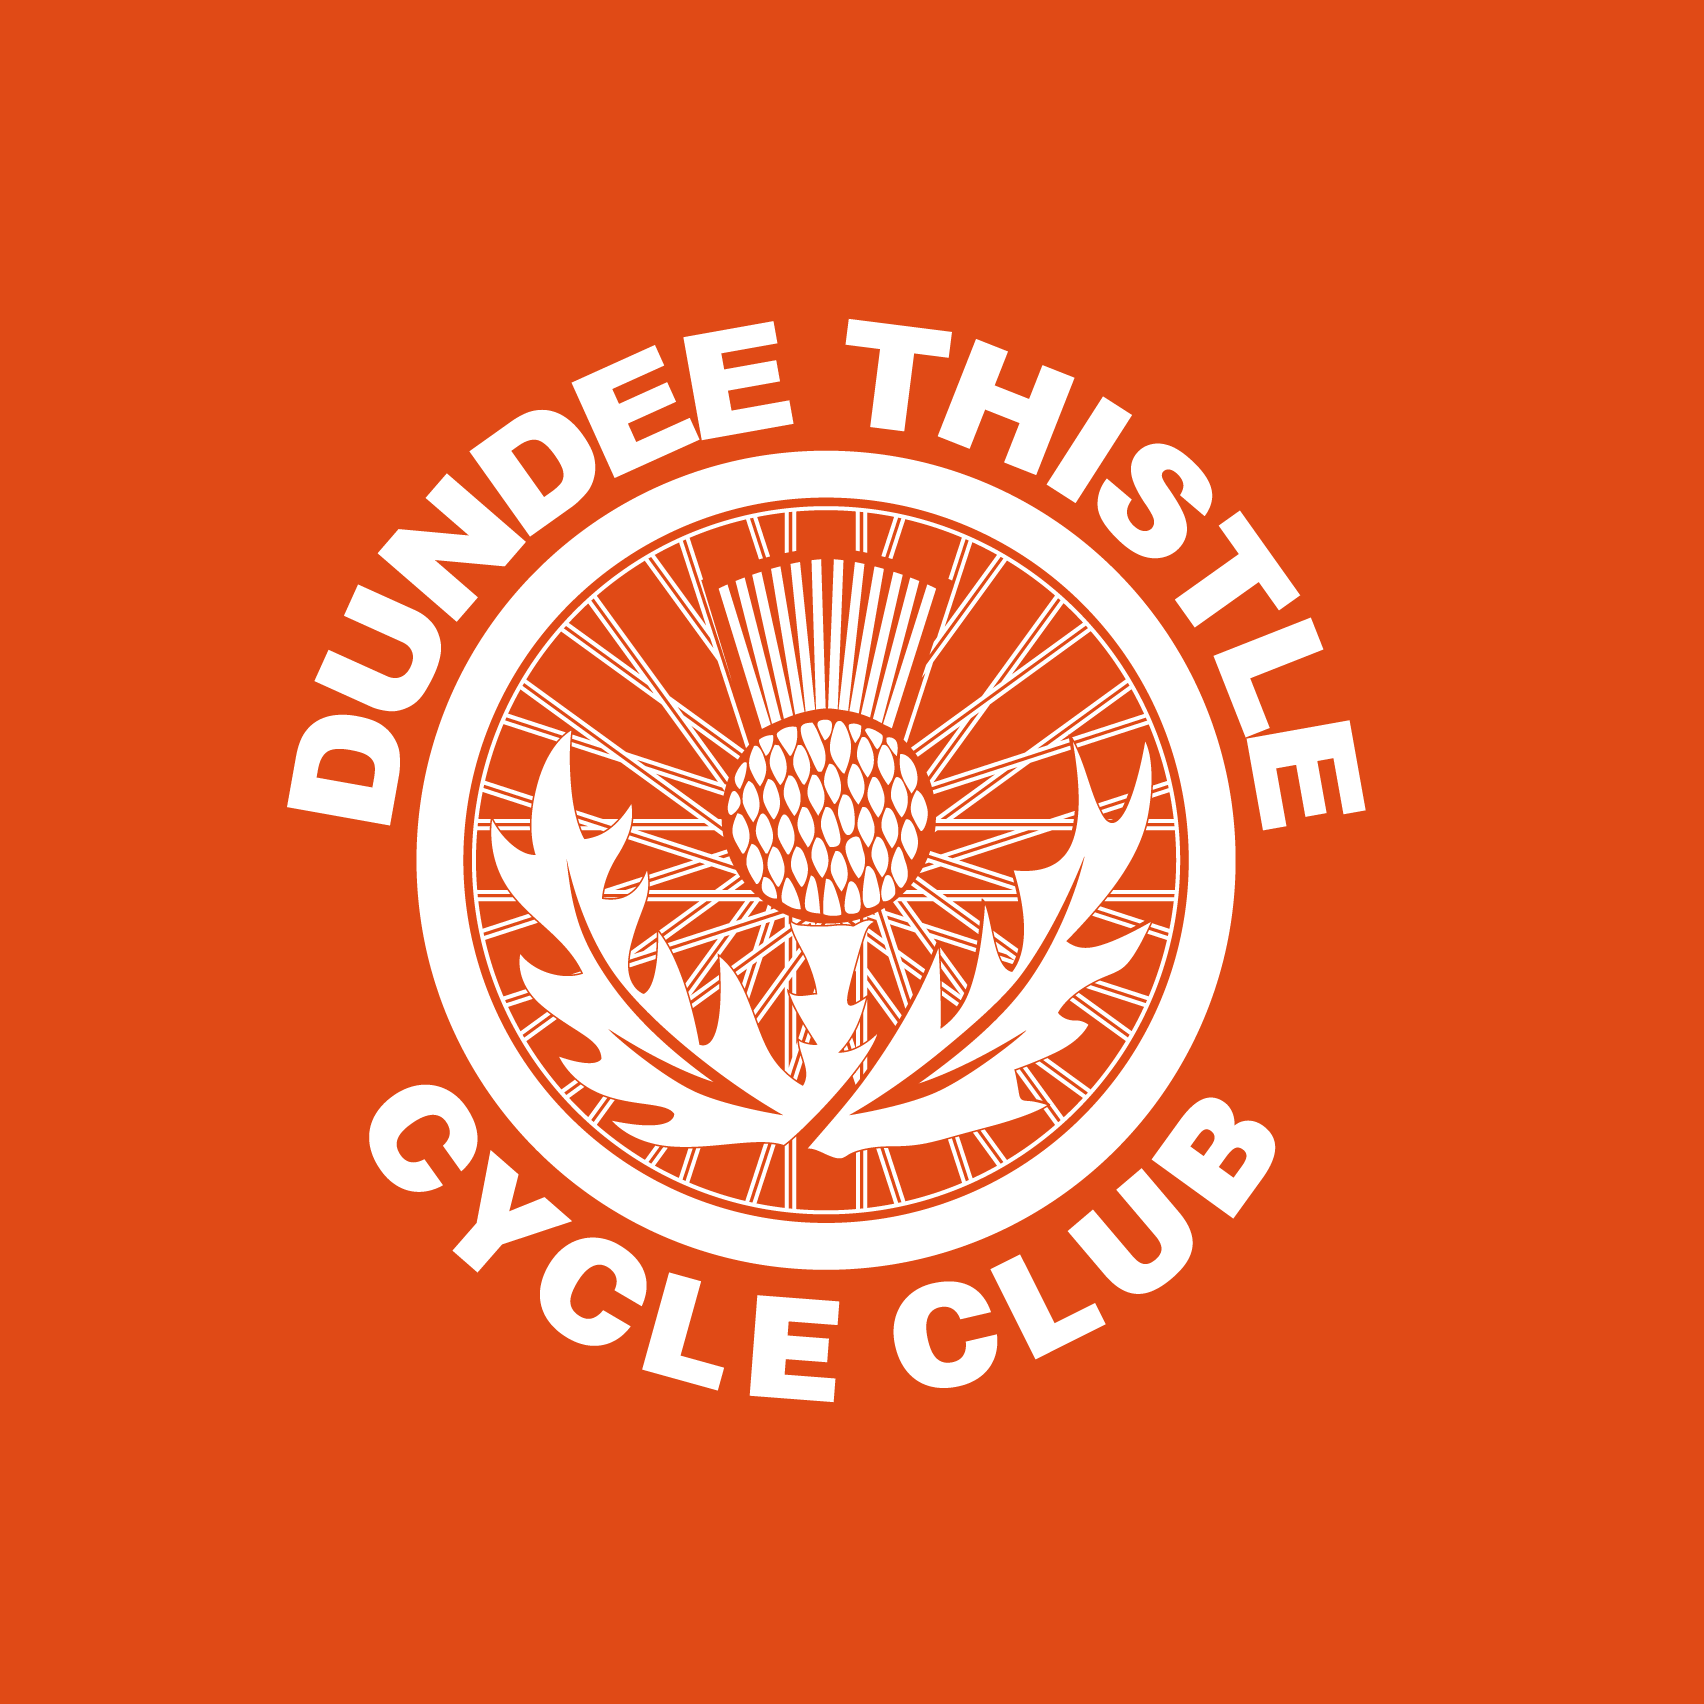 Club Image for DUNDEE THISTLE